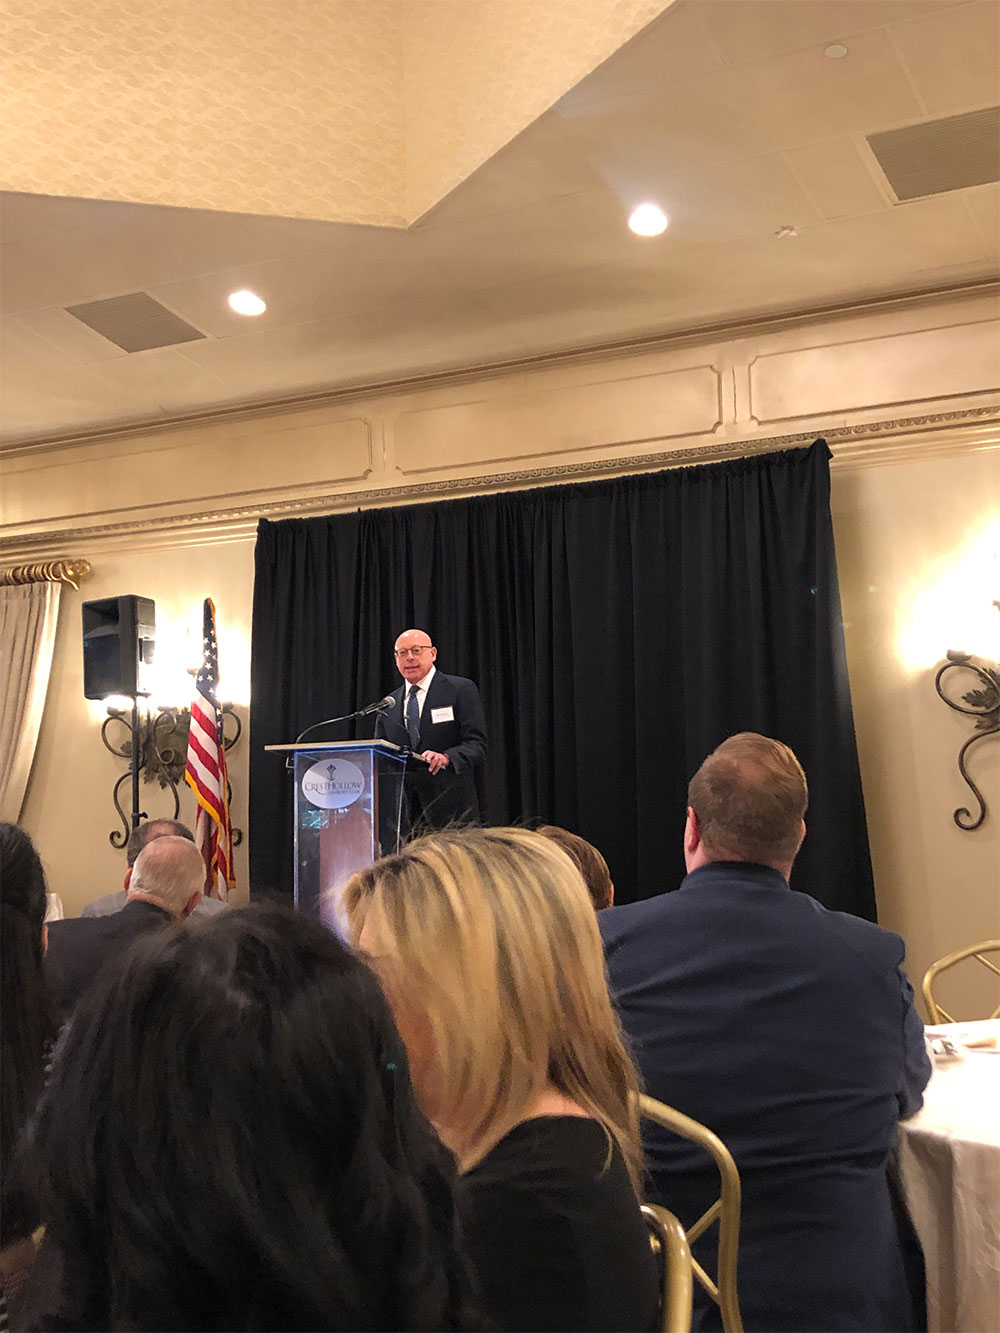 Michael Sahn presenting at the 2019 Innovator of the Year Awards Ceremony